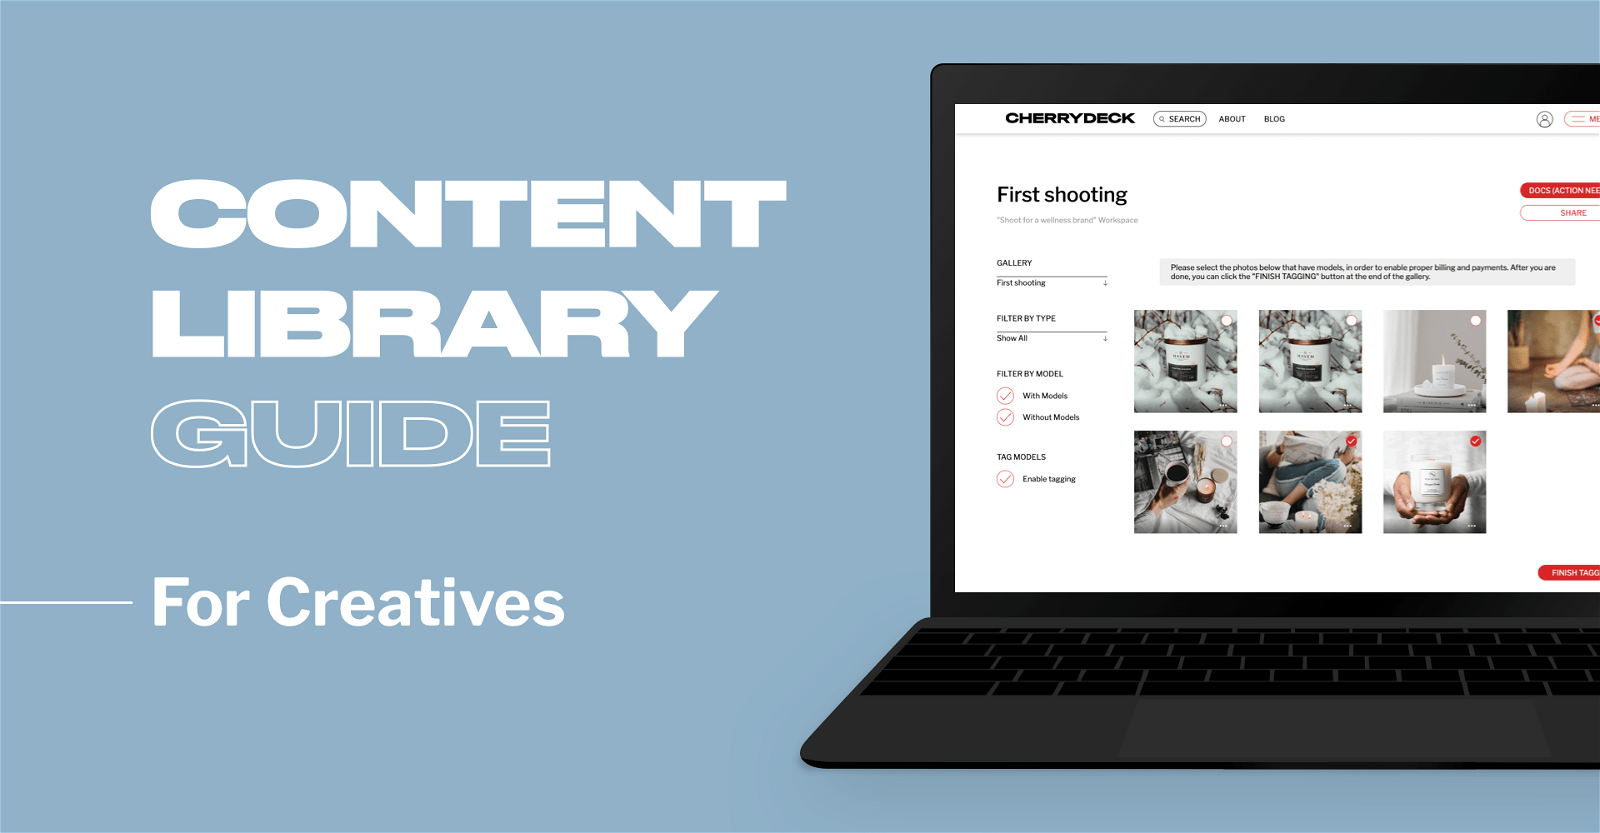 Cherrydeck’s Content Library Guide – For Creatives